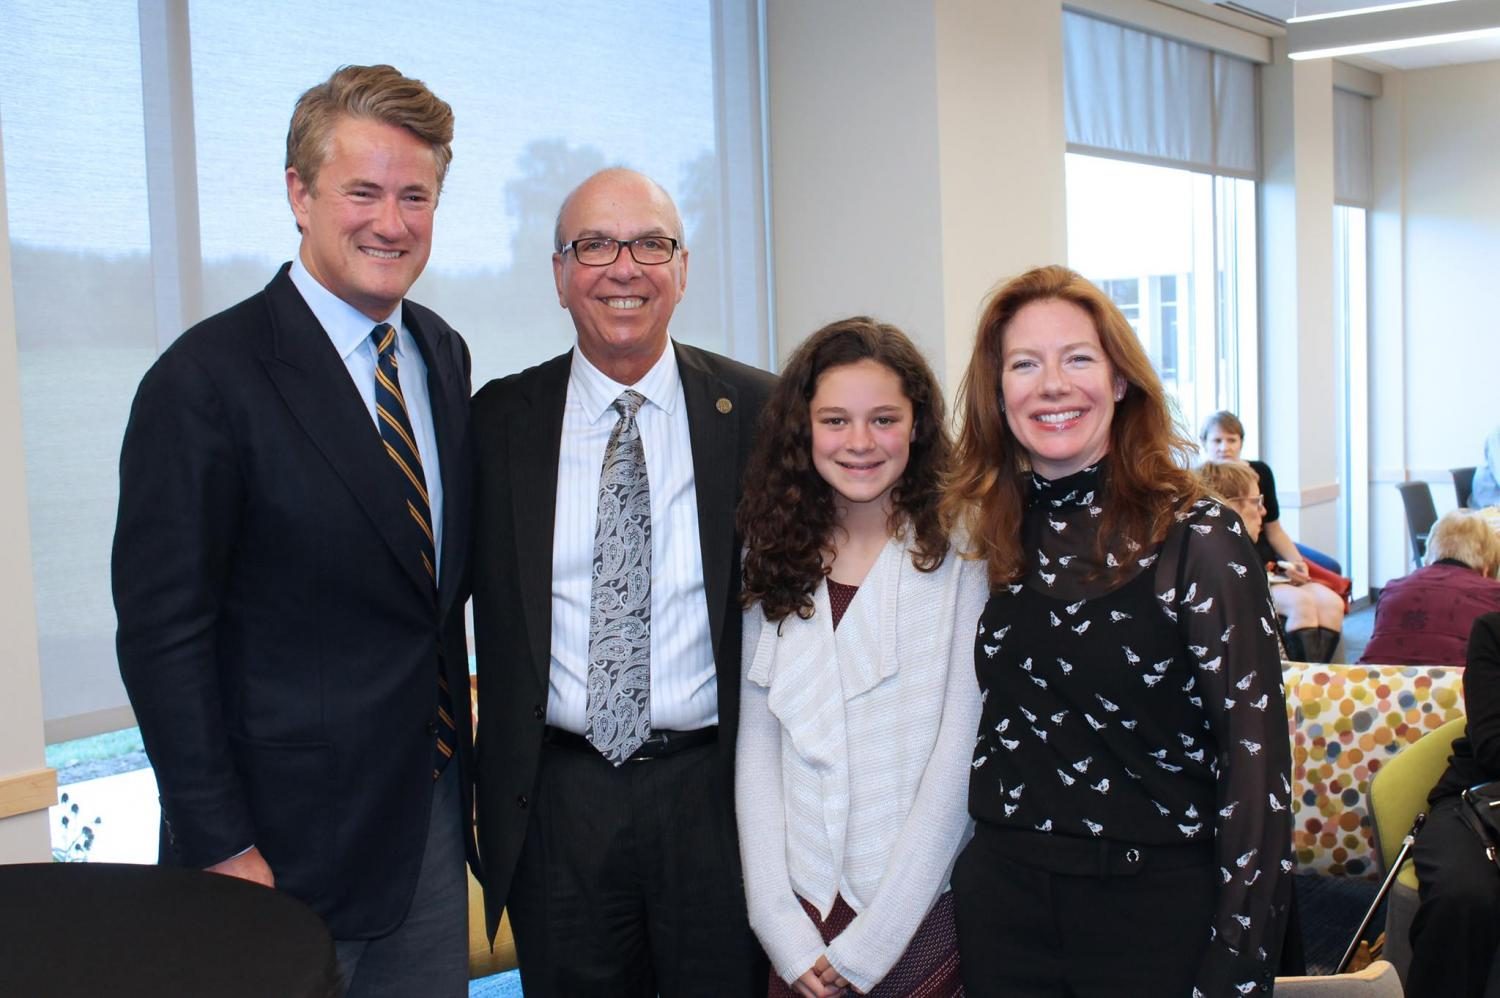 Joe Scarborough, opening speaker at the 64th Sinai Forum,
poses with Chancellor Keon and his family.